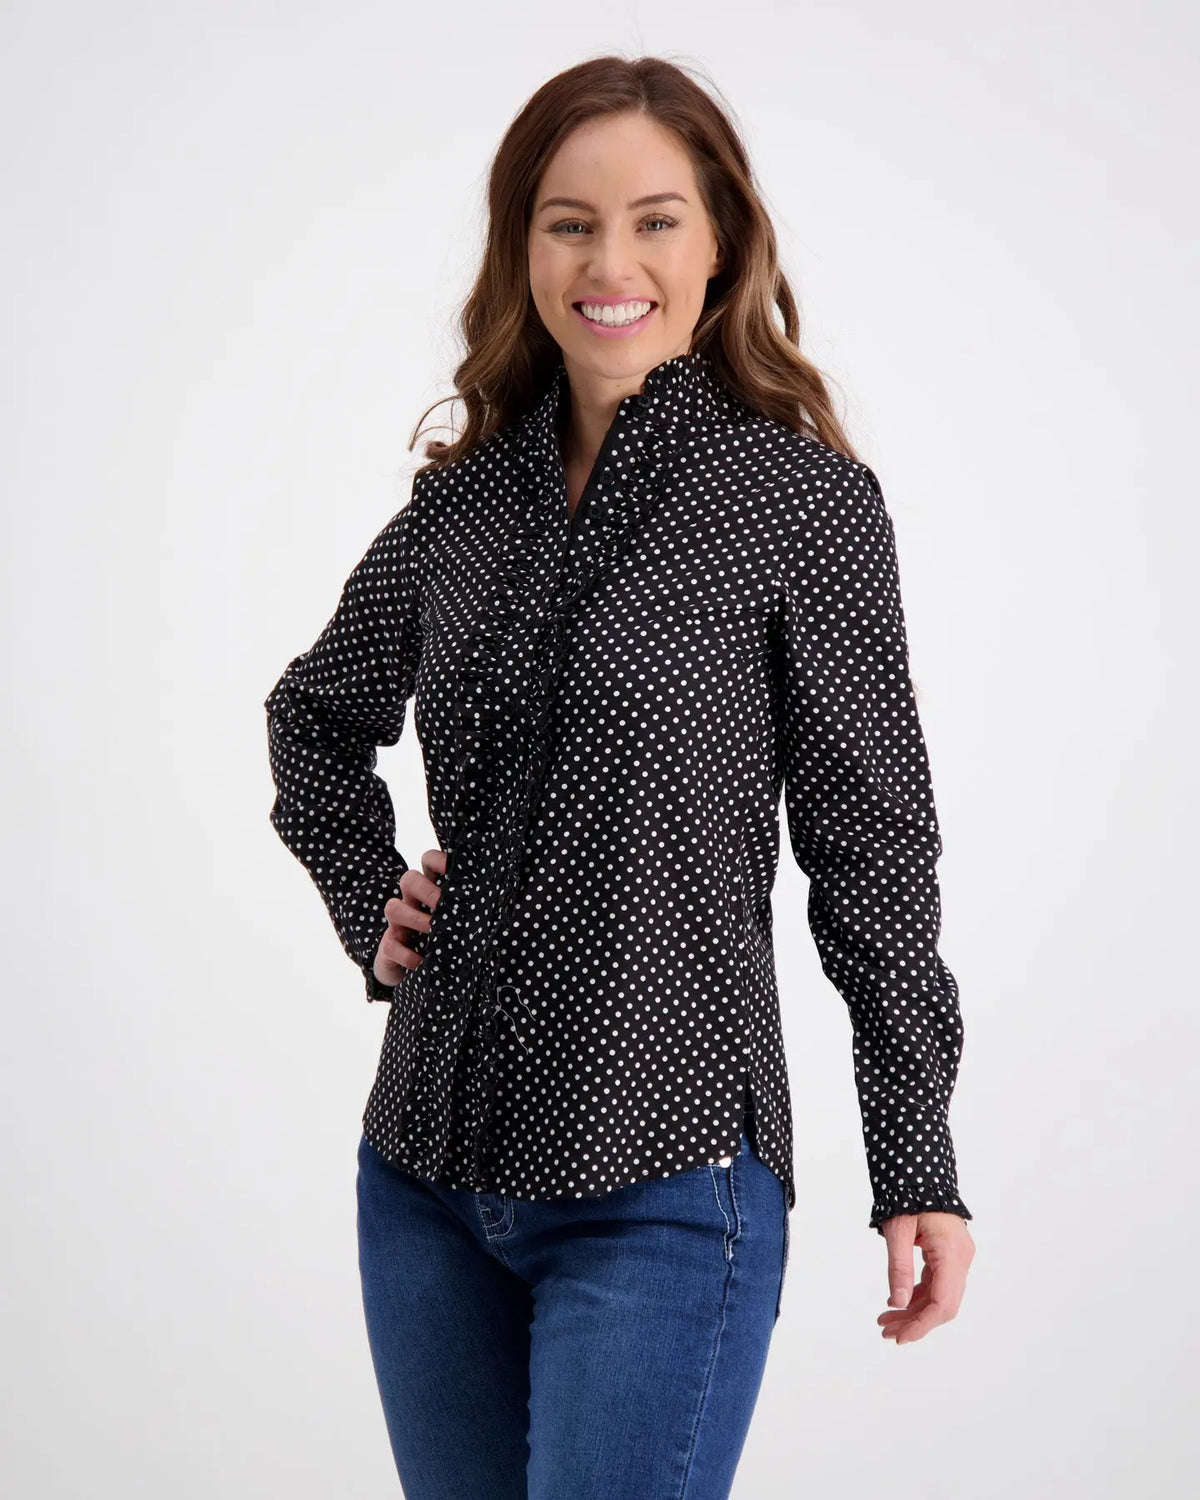 Black Ruffle Shirt With White Spots Outback Supply Co